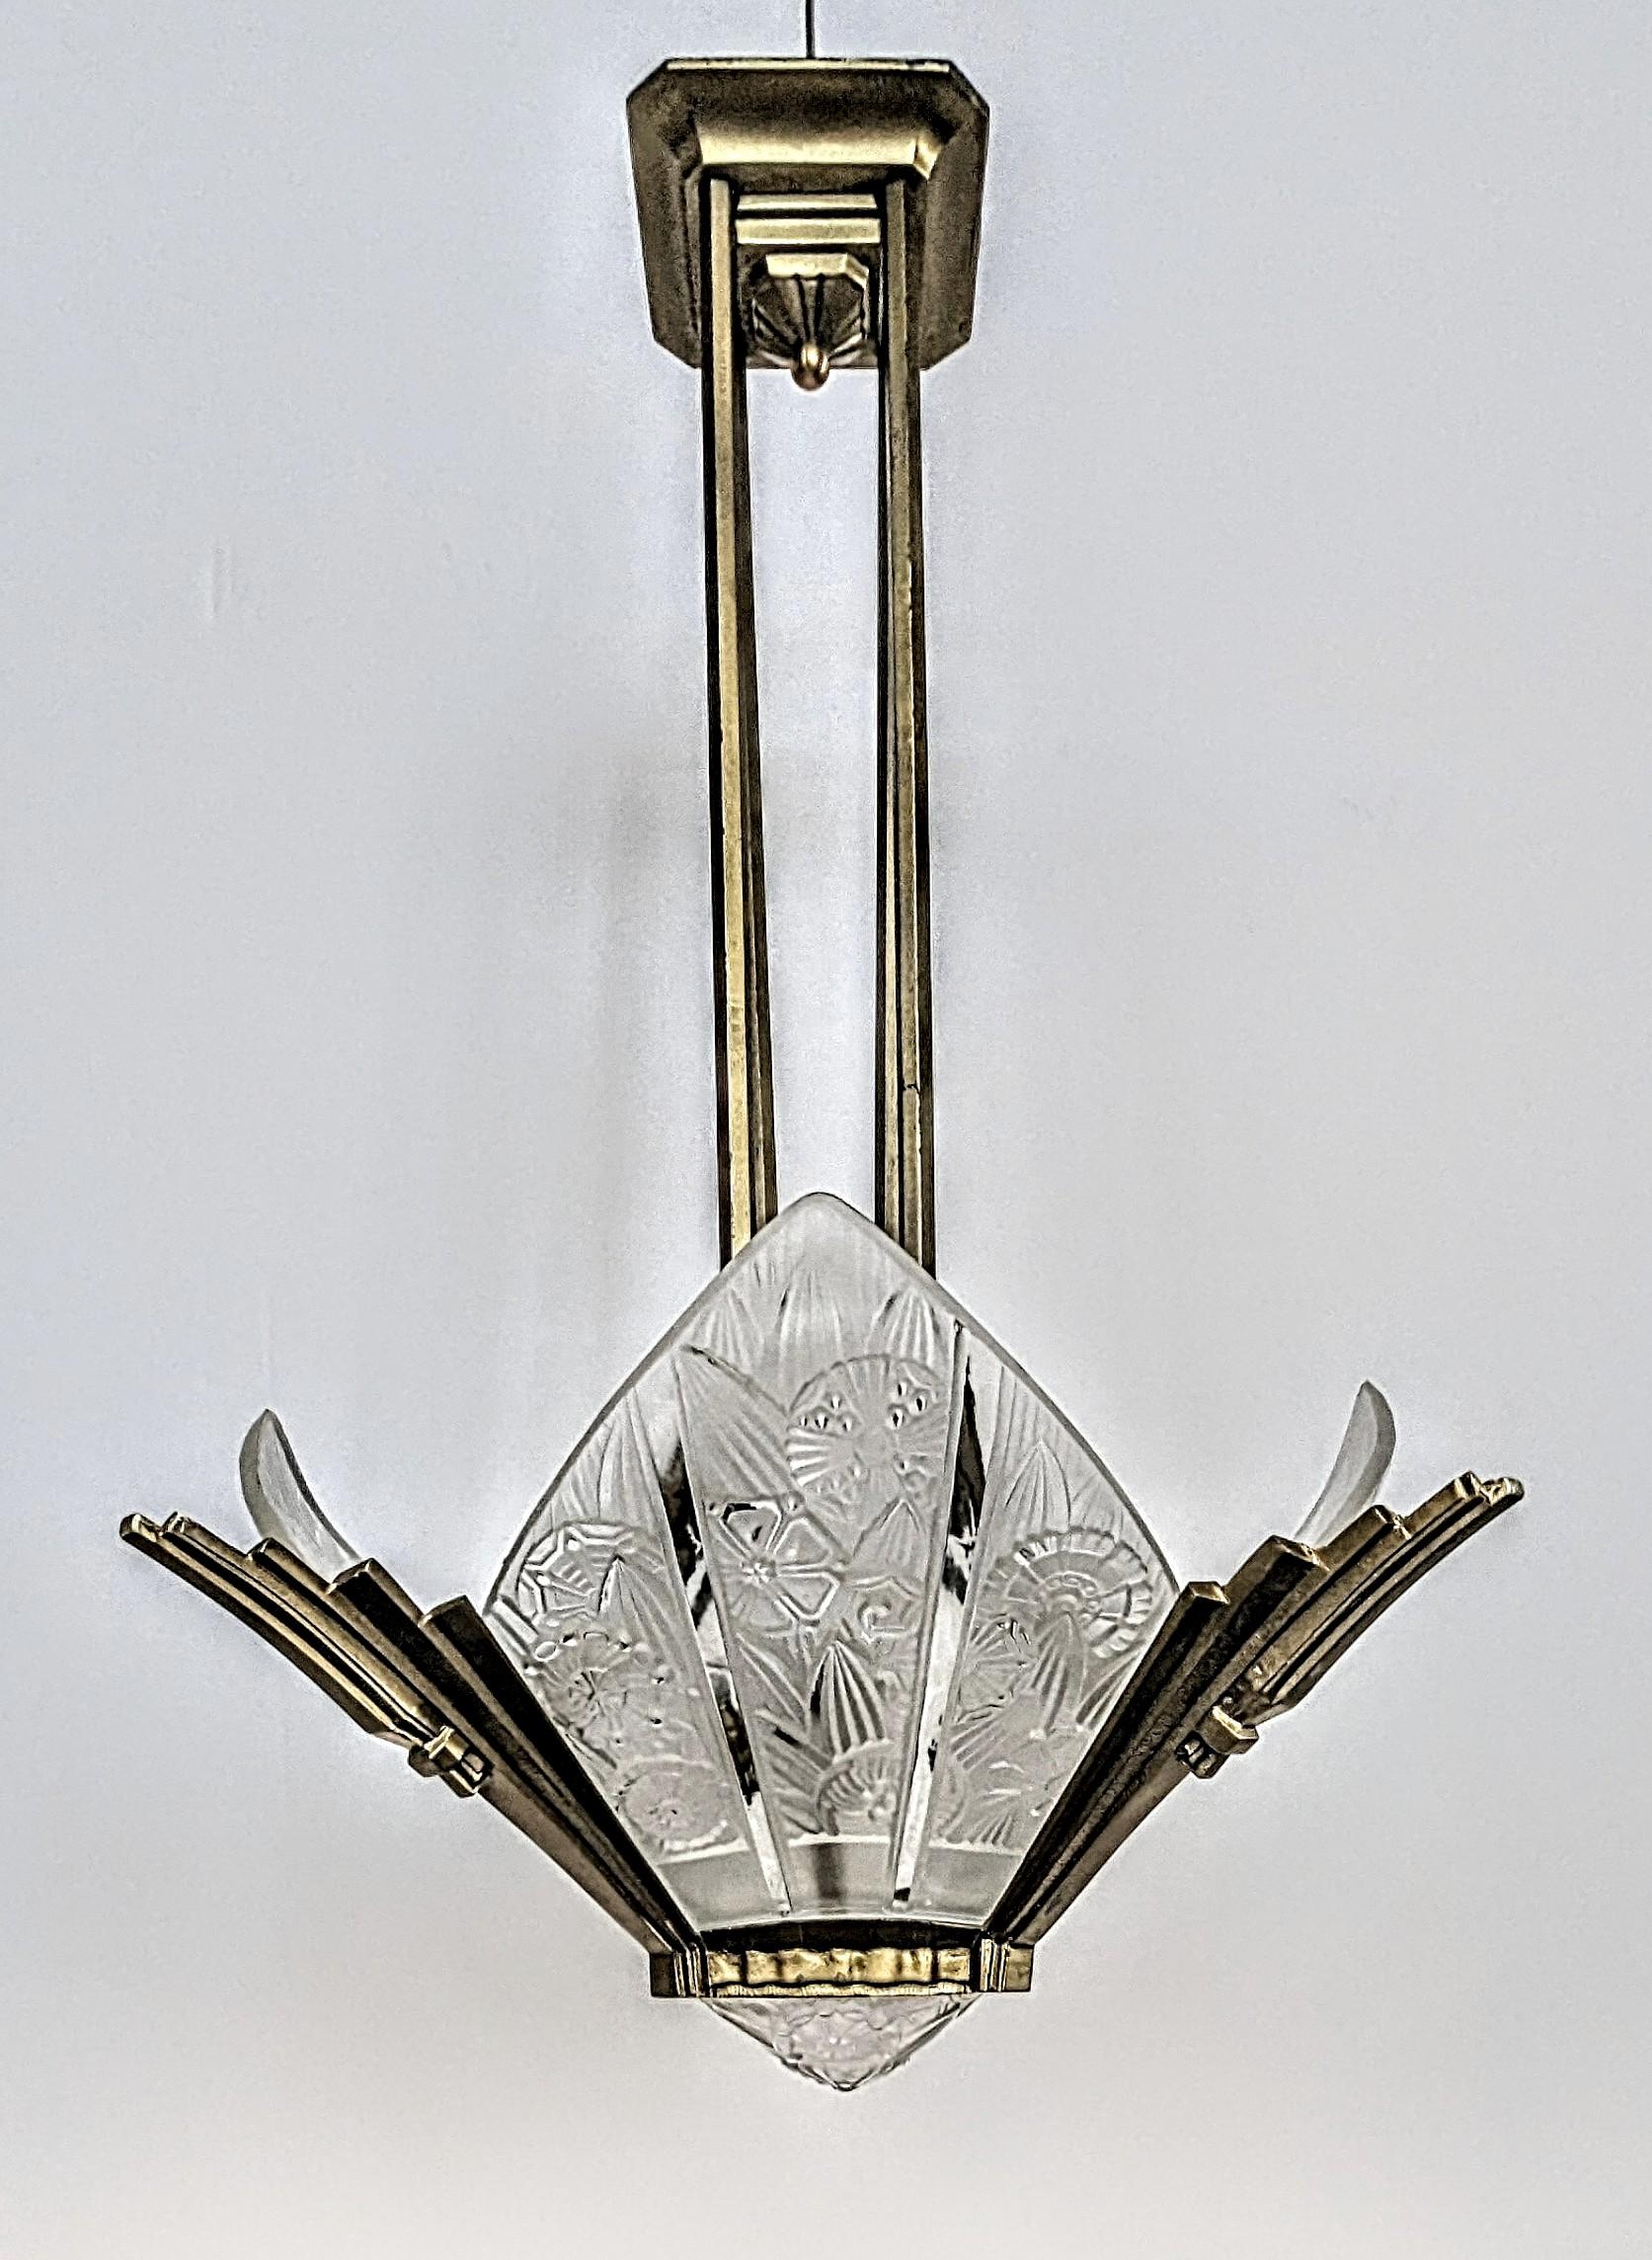 Cast French Art Deco Chandelier Signed by Hettier Vincent For Sale